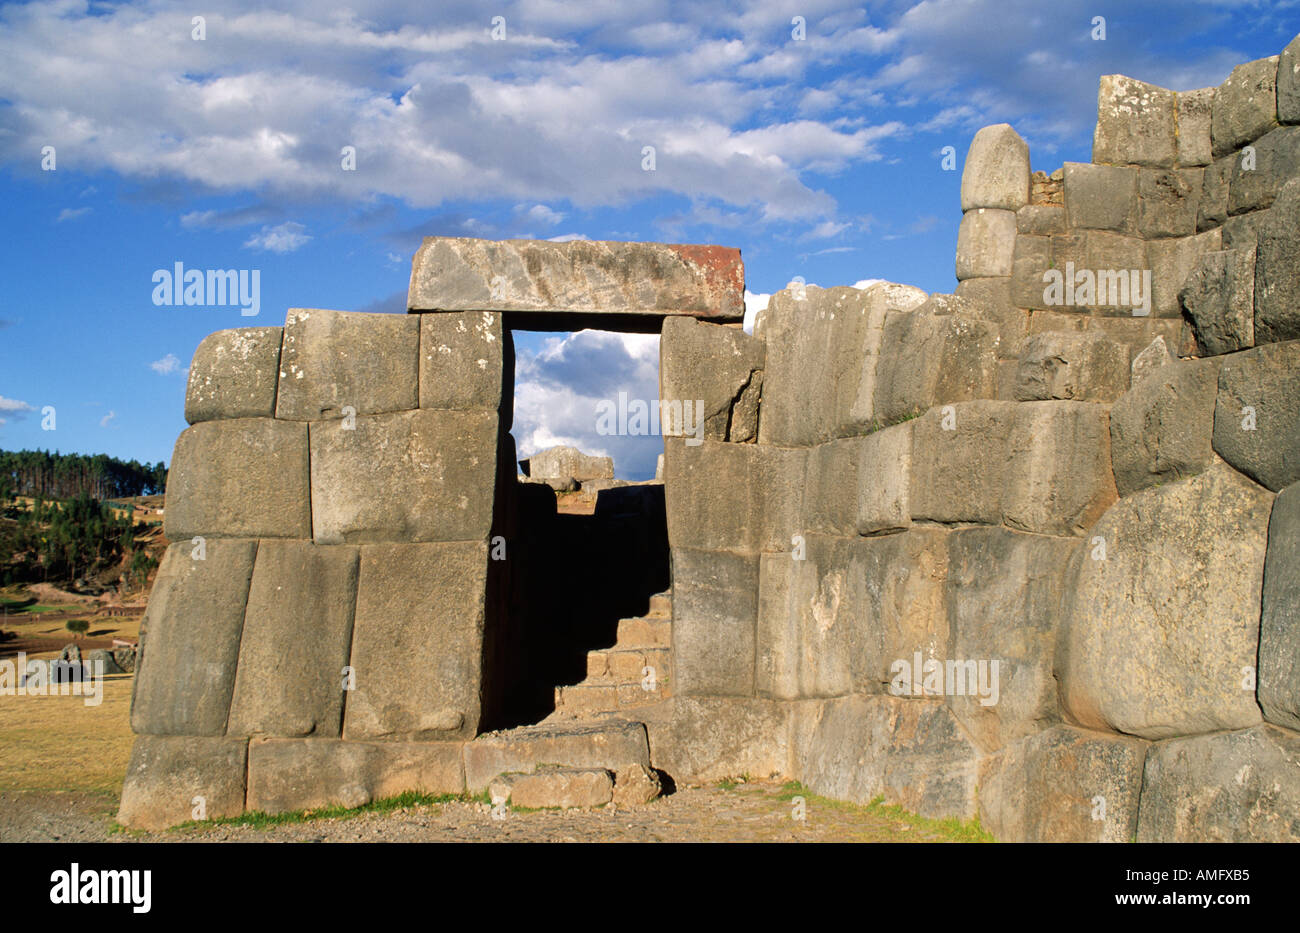 Doorway at the INCA RUINS of SACSAYHUAMAN which form the Puma Head portion  of Cuzco PERU Stock Photo - Alamy